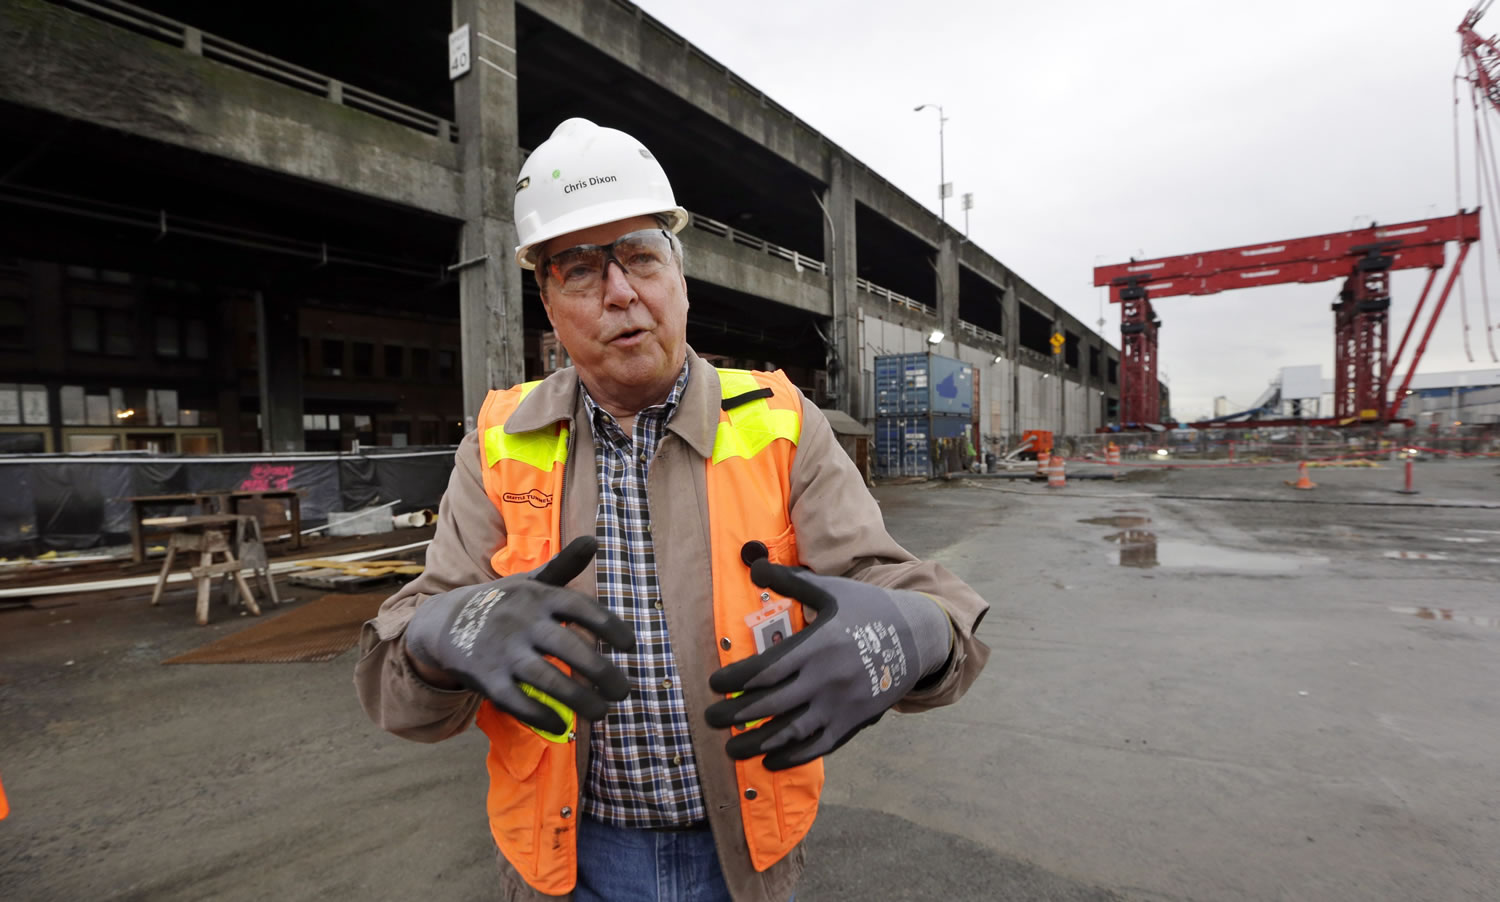 Seattle Tunnel Partners Project Manager Chris Dixon speaks with media members Wednesday in Seattle at the site of a giant tunnel being dug below him to replace the elevated Alaskan Way Viaduct roadway behind him.